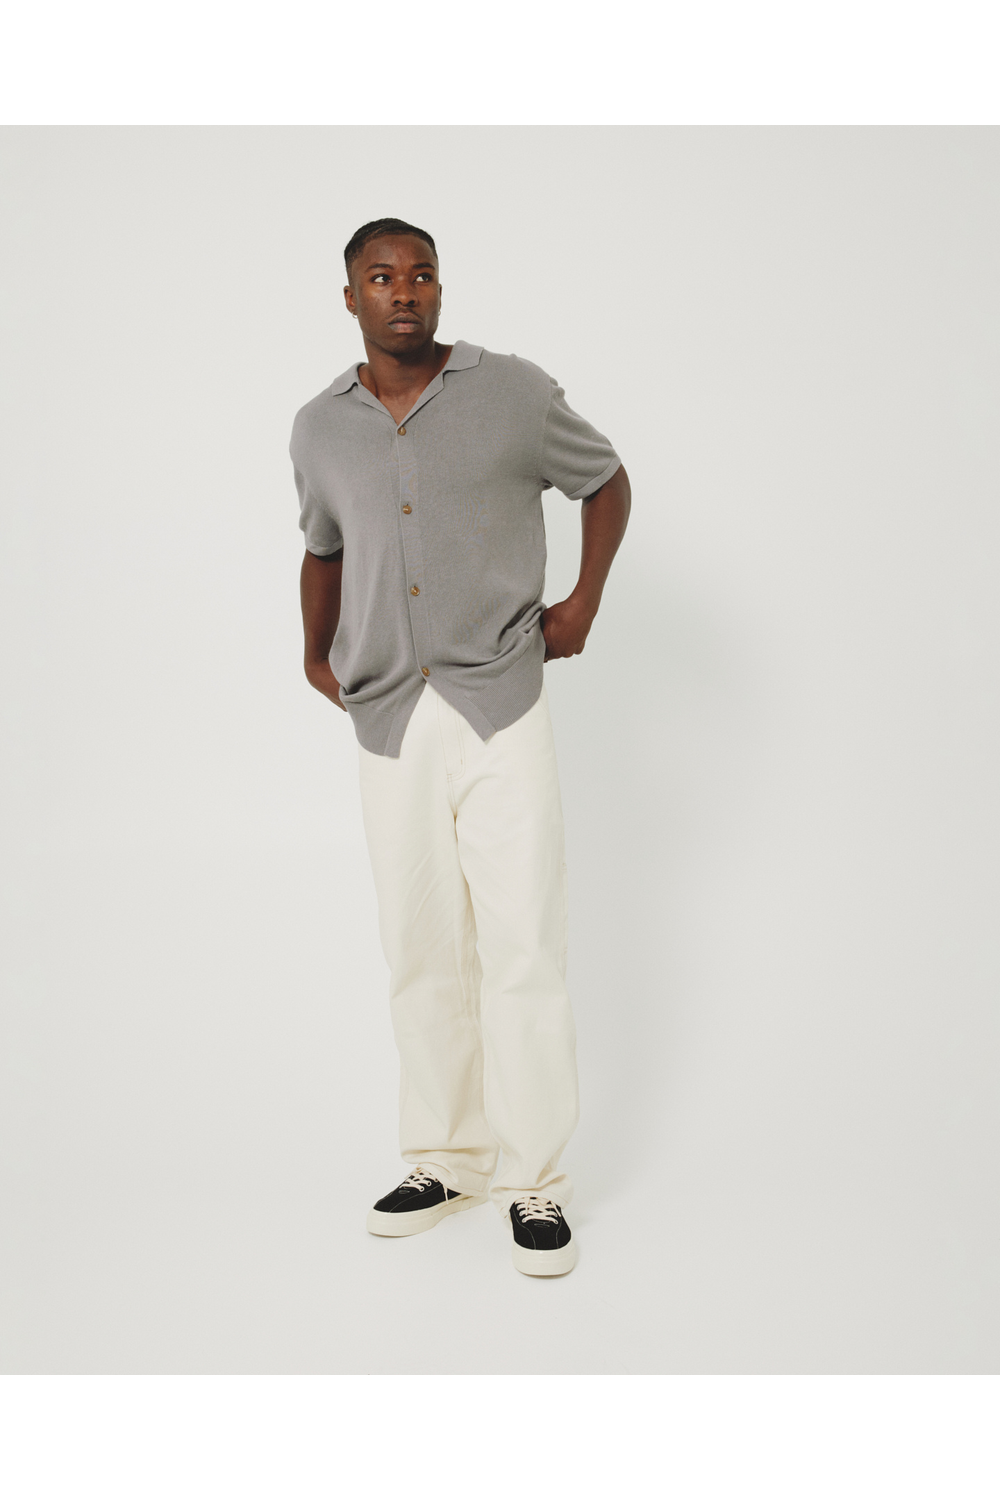 Kore Studios Camper Knit SS Shirt - Ash | Kore Studios | Mad About The Boy